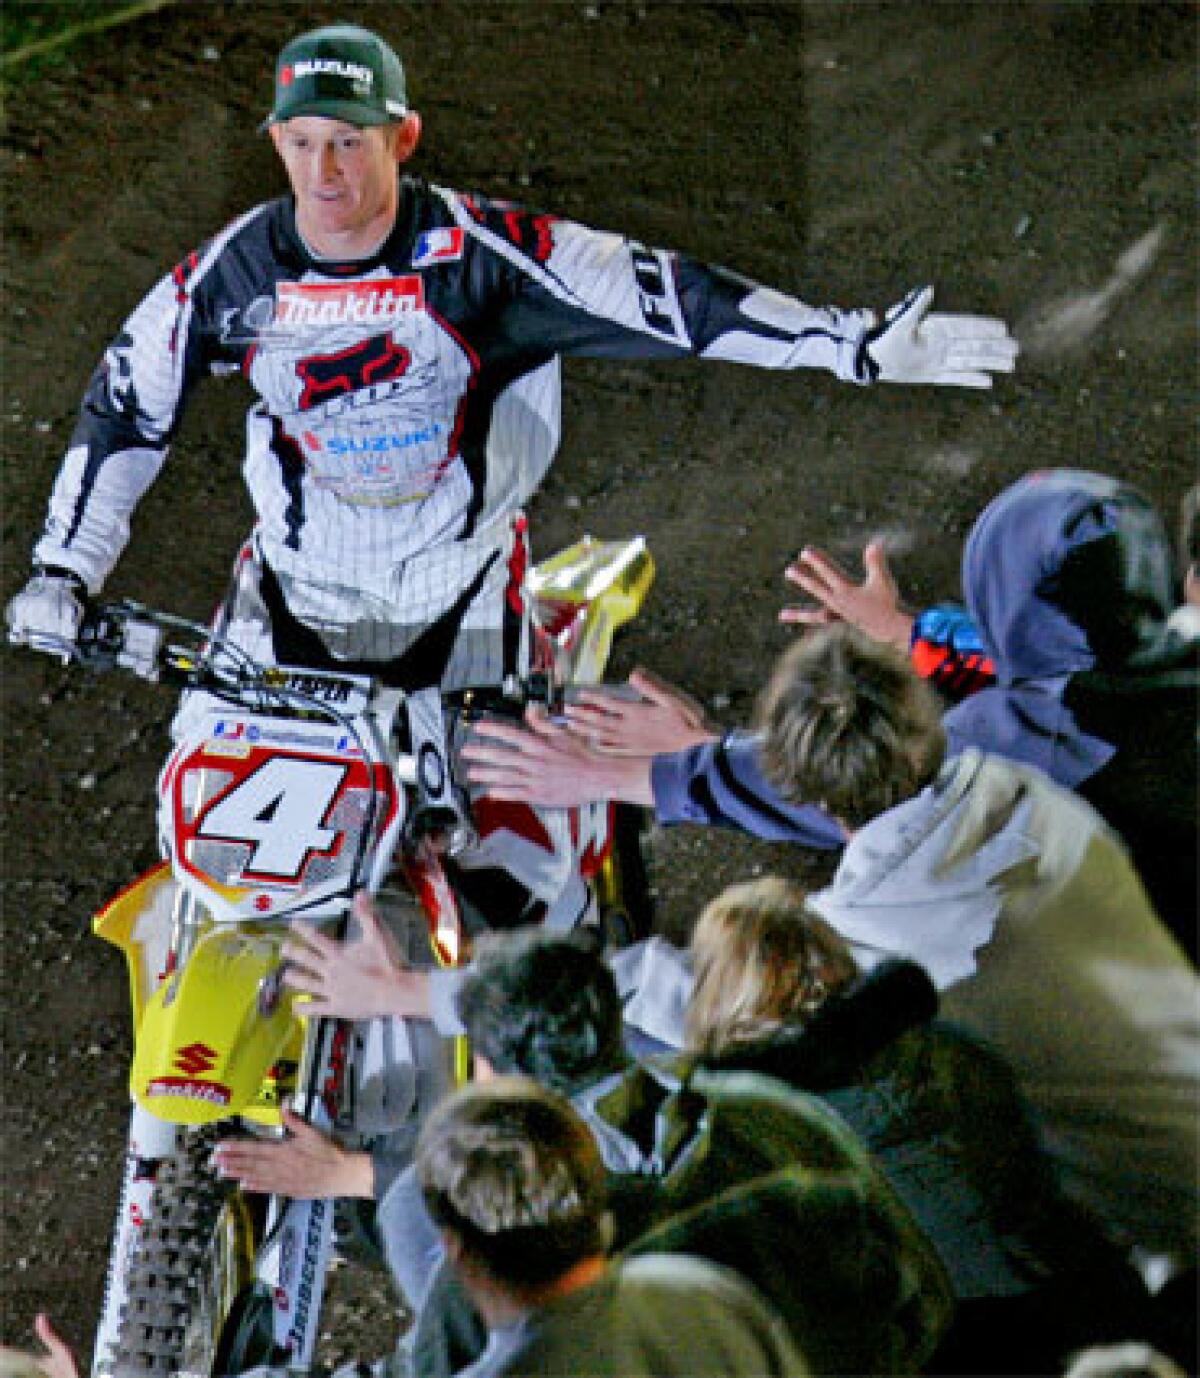 Ricky Carmichael greets fans at Angel Stadium. The 27-year-old will be giving NASCAR a try, and James Stewart, who defeated Carmichael on Saturday, is an heir apparent in a sport whose racers fly faster, farther and higher than anyone thought possible just two years ago.